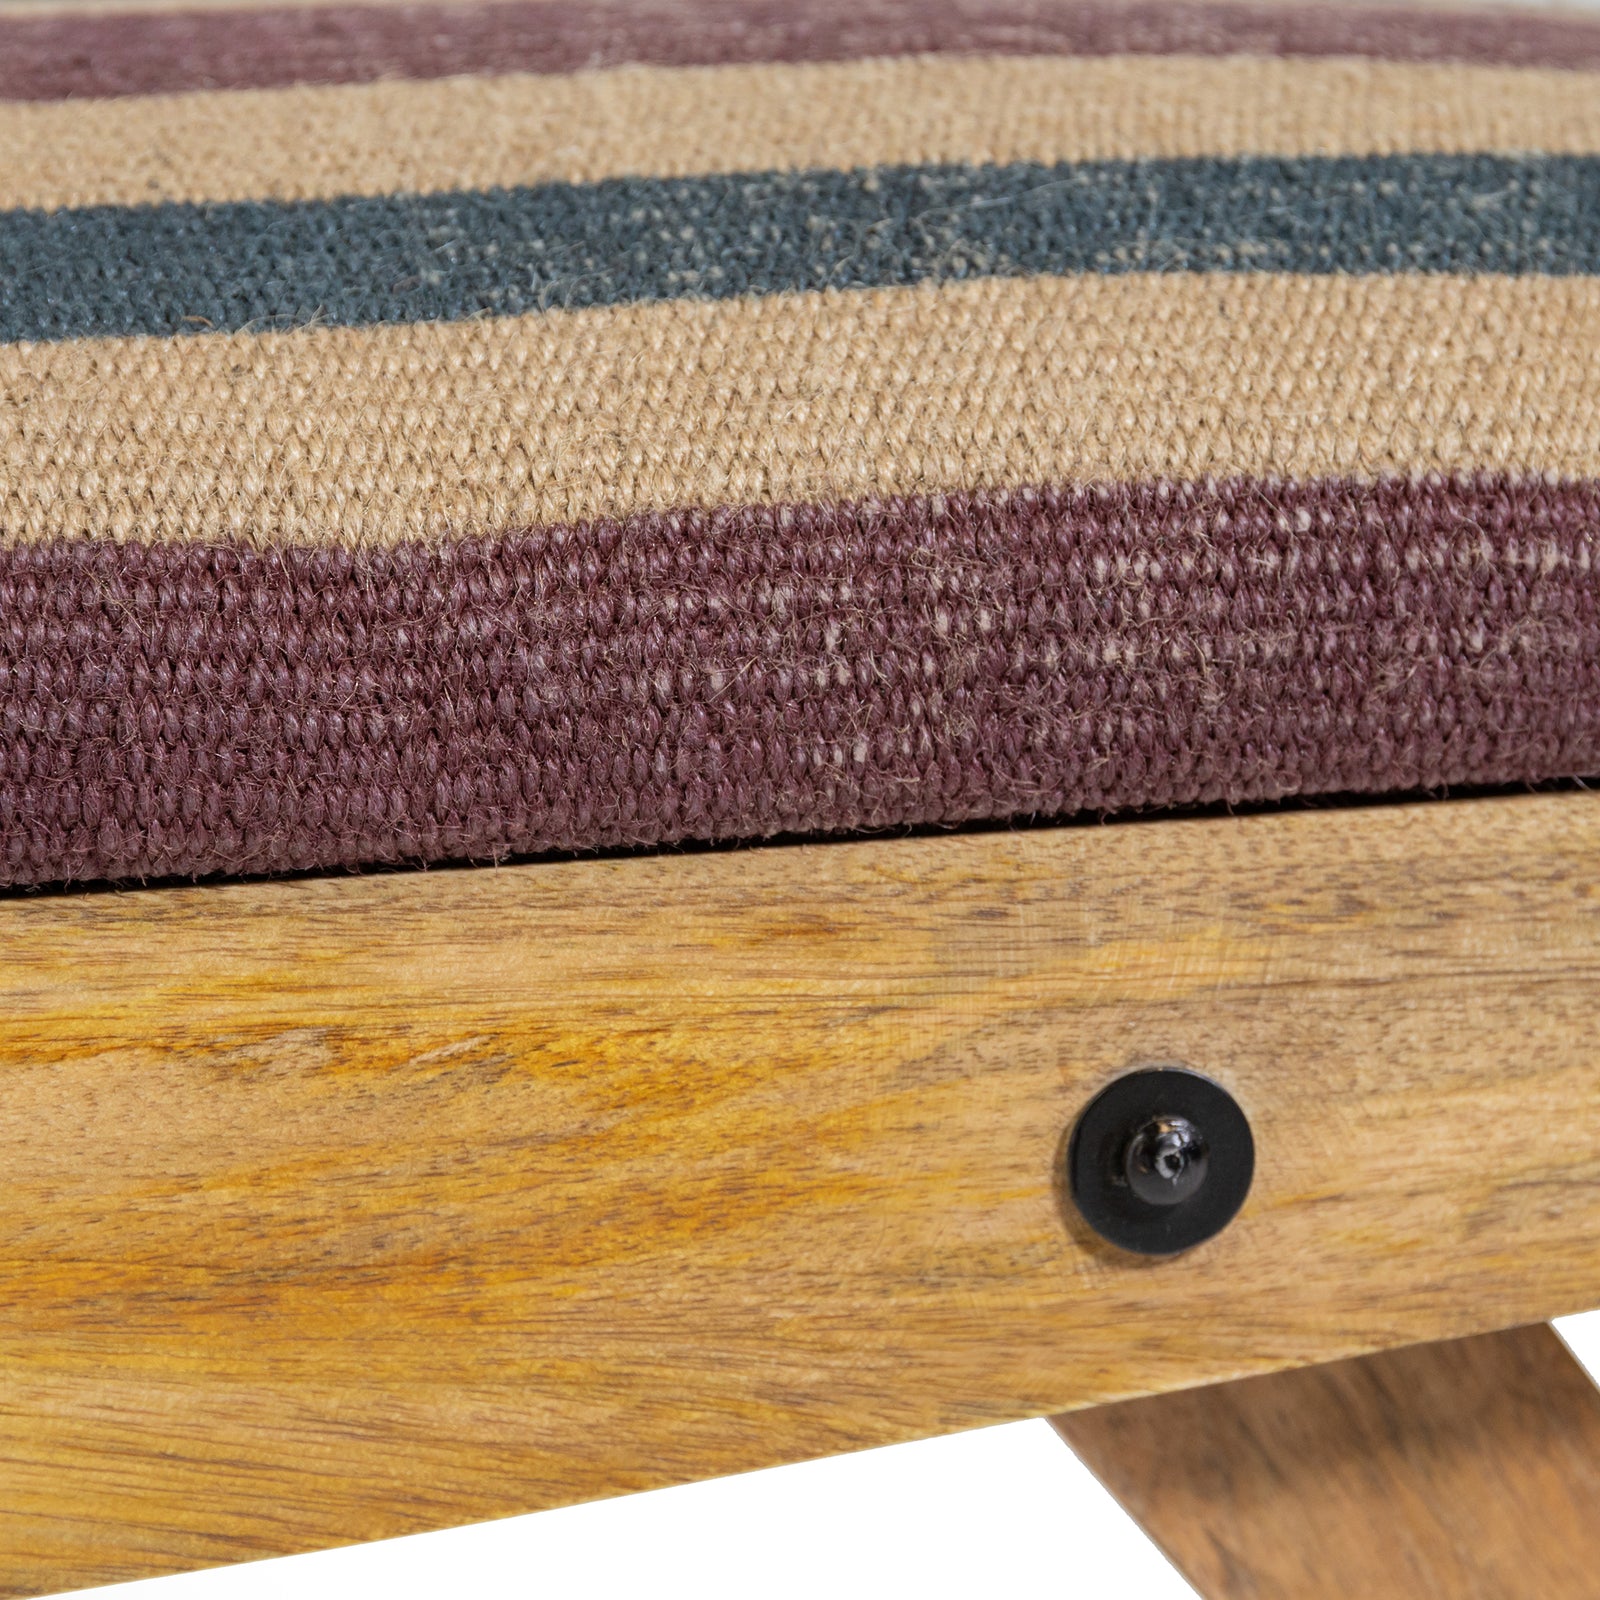 Knock Down Bench With stripes Cap Ferret